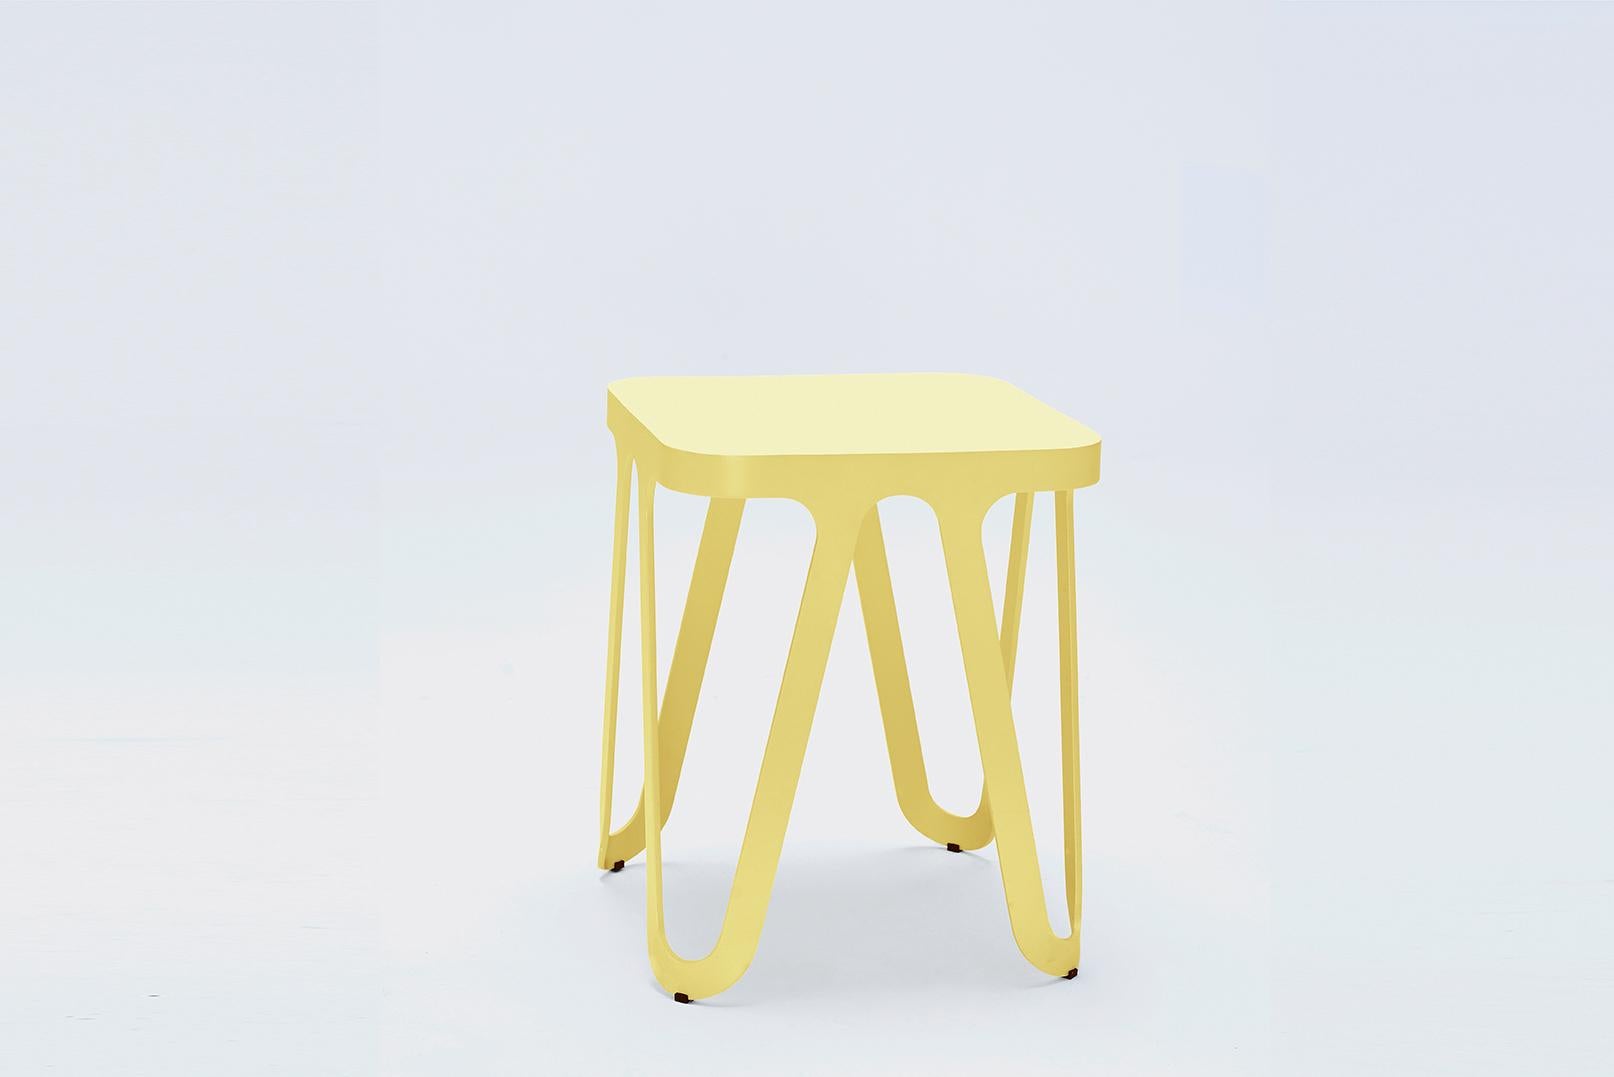 Yellow Loop stool by Sebastian Scherer
Dimensions: D38 x W38 x H44 cm
Material: Aluminium
Weight 3.5 kg
Also available in wood.
Also available in colours: snow white / light sand / sun yellow / clay orange / rust red / space blue / graphite